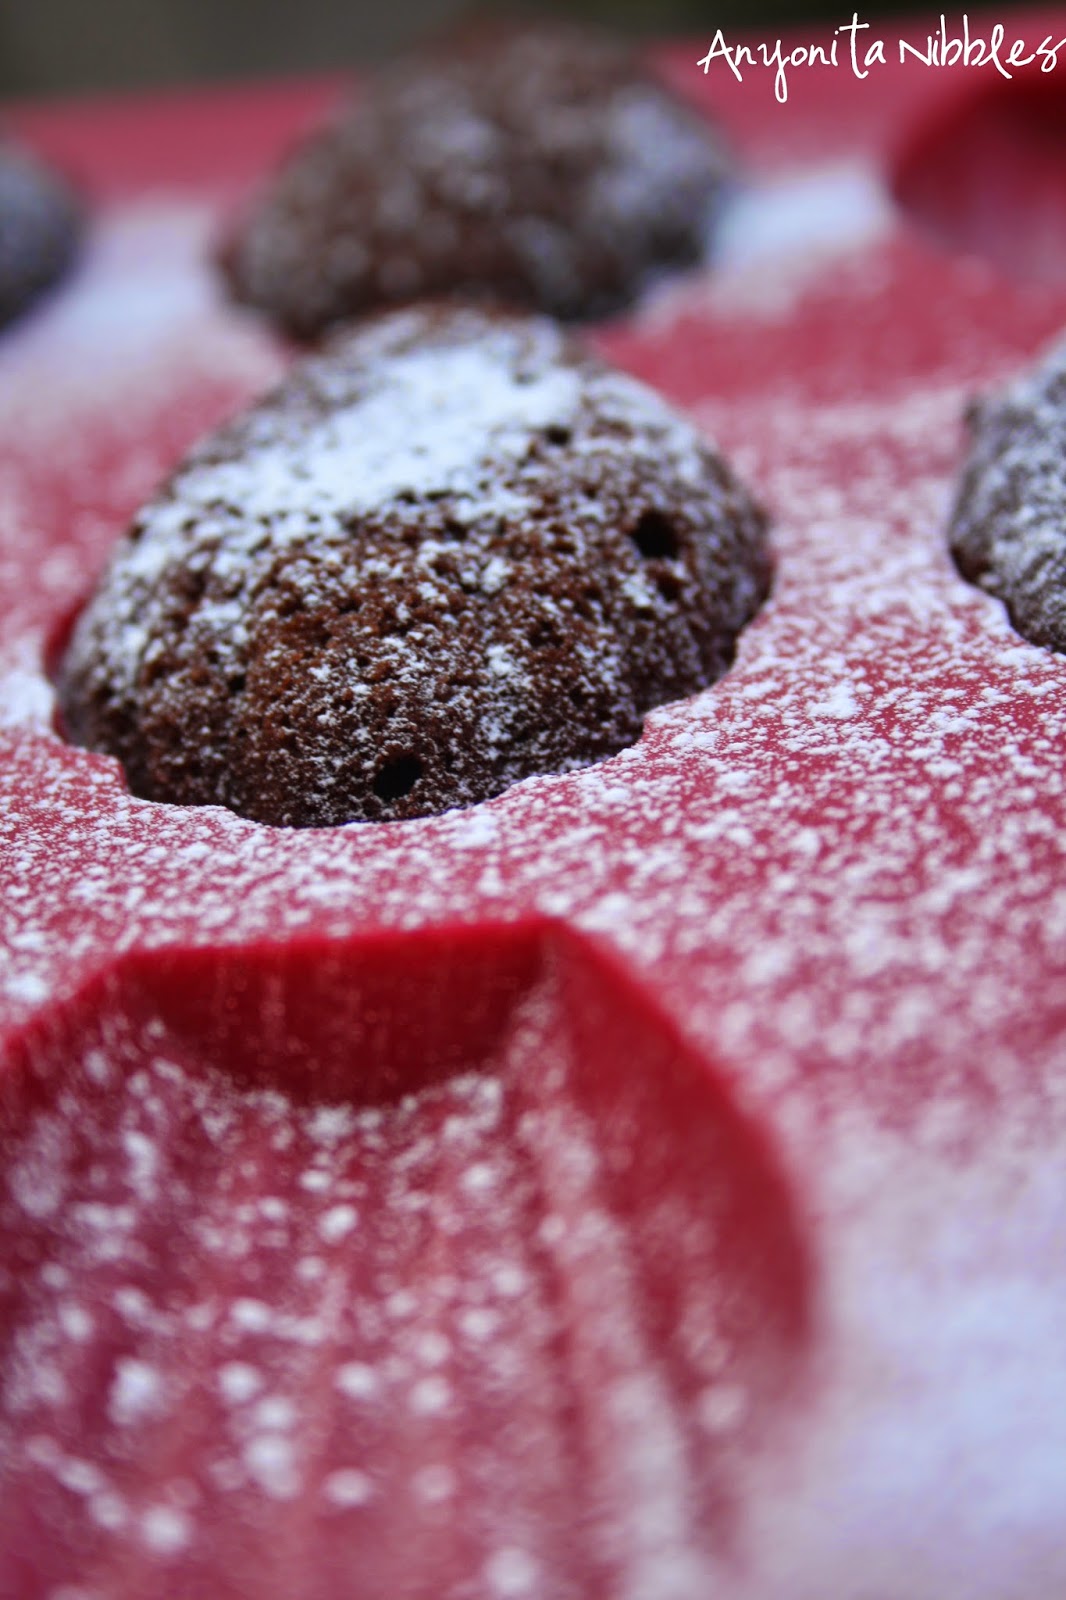 Sugar dusted double chocolate and coffee madeleines from Anyonita Nibbles